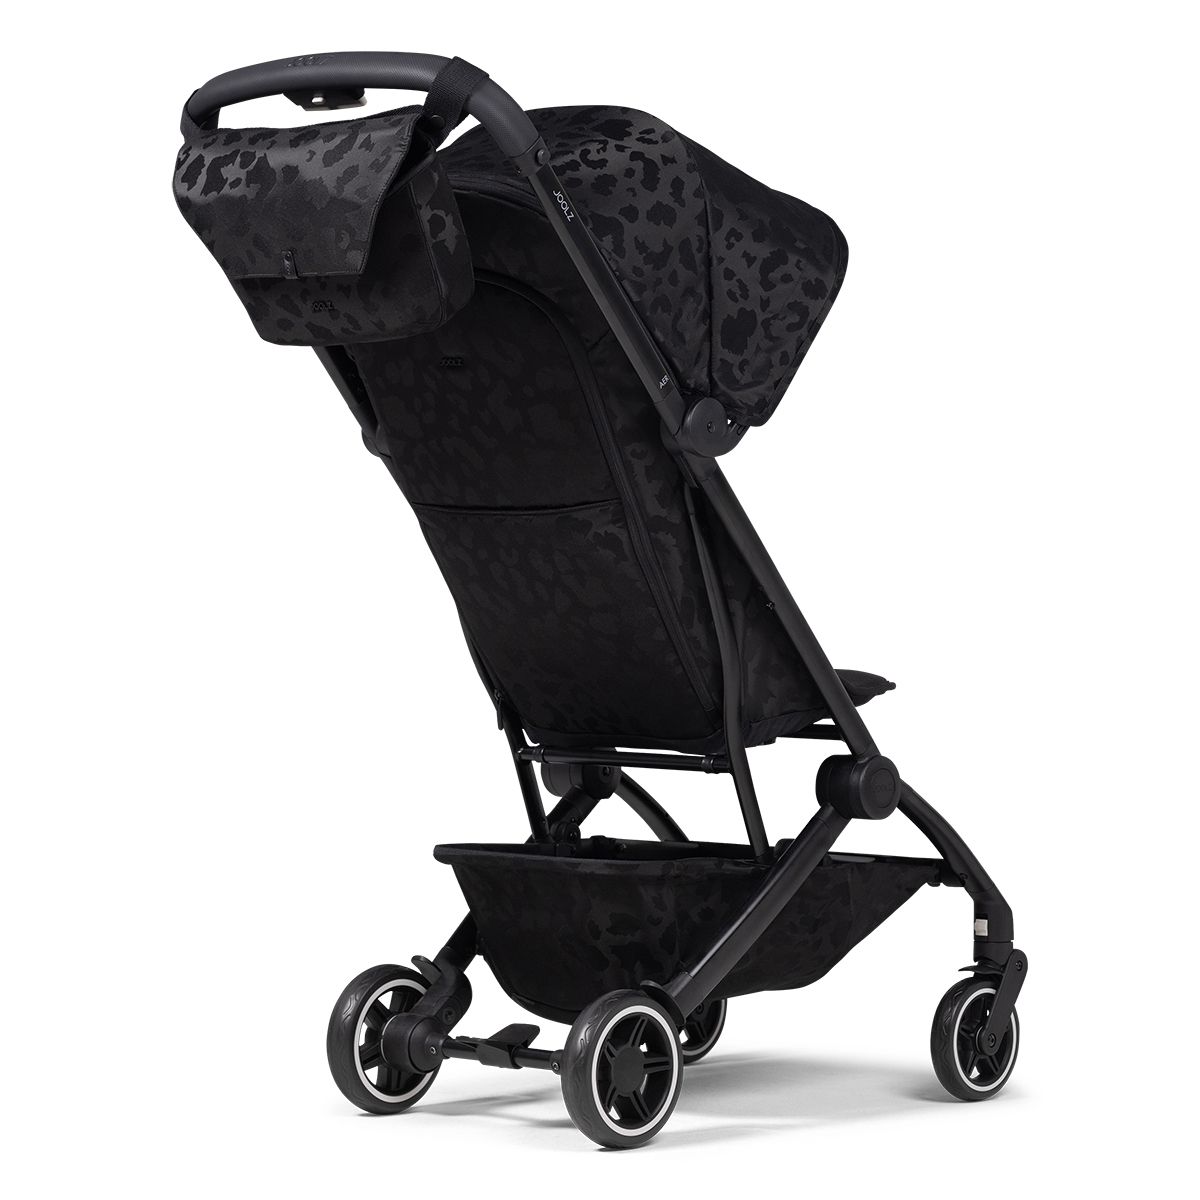 Joolz Aer+ Stroller Special Edition - Chic Renaissance